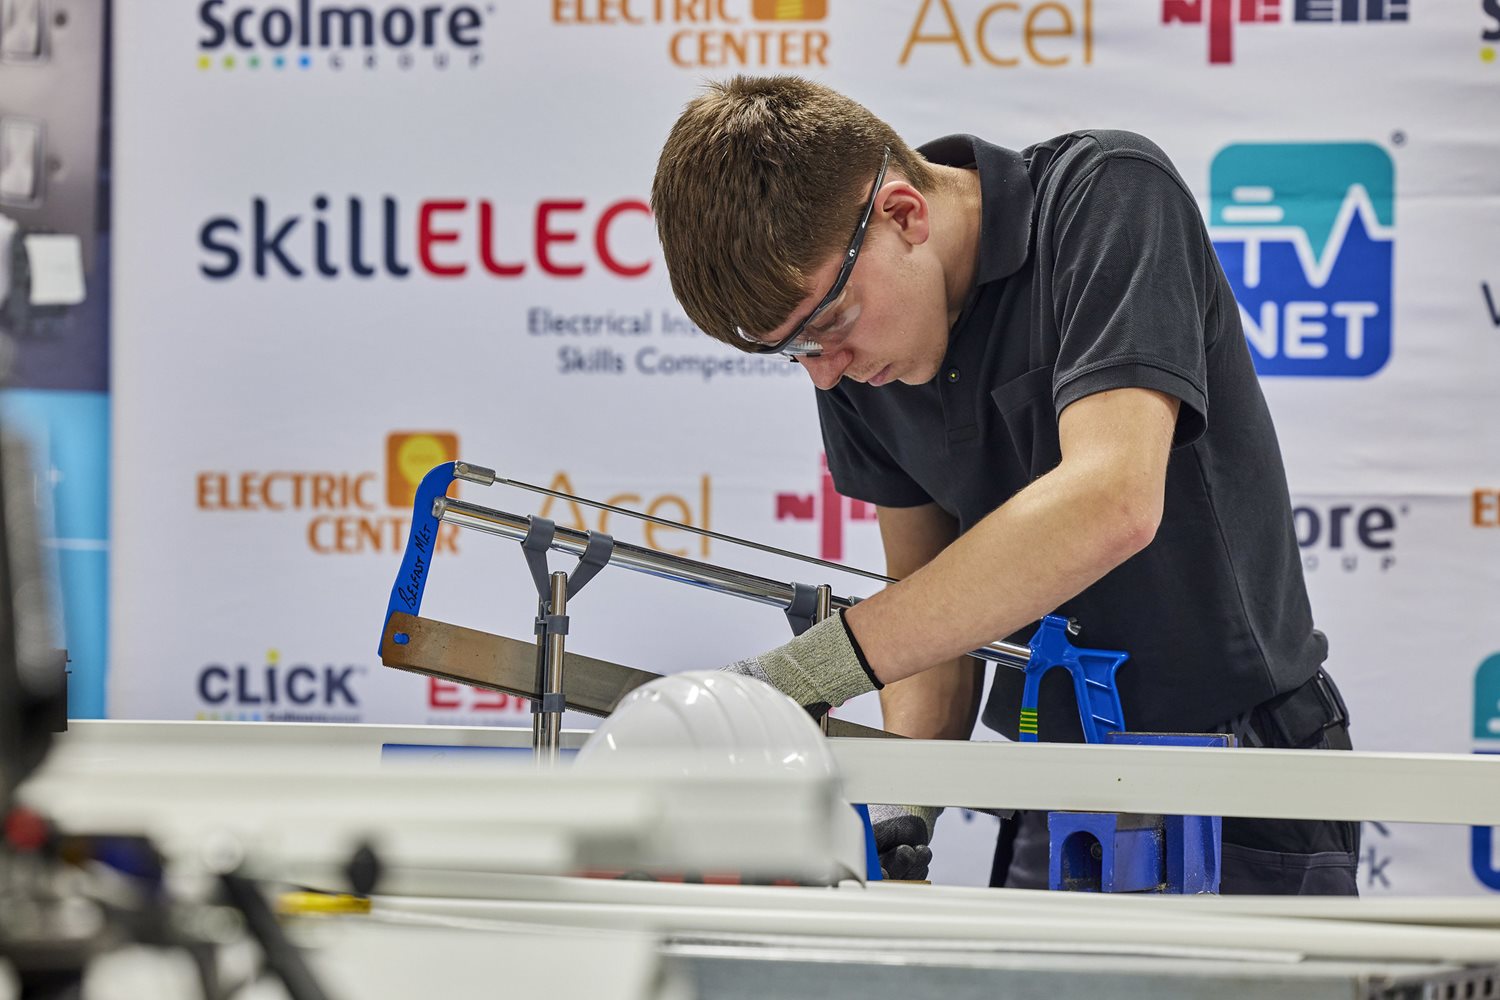 Contestant at Skill Electric.